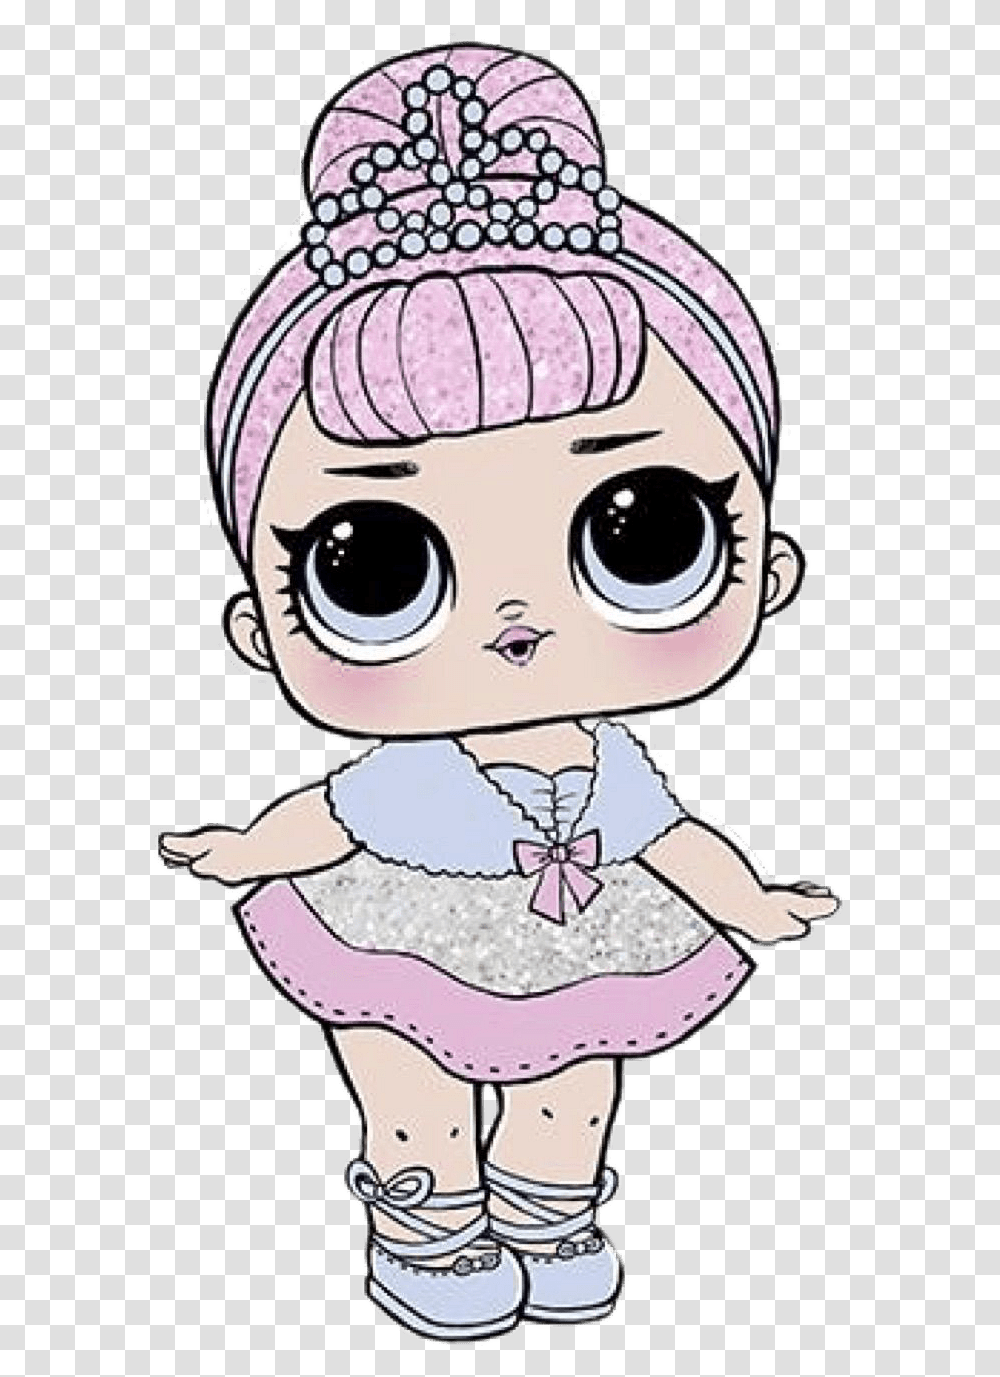 Crystal Queen Crystal Queen Lol Doll, Toy, Drawing, Art Transparent Png